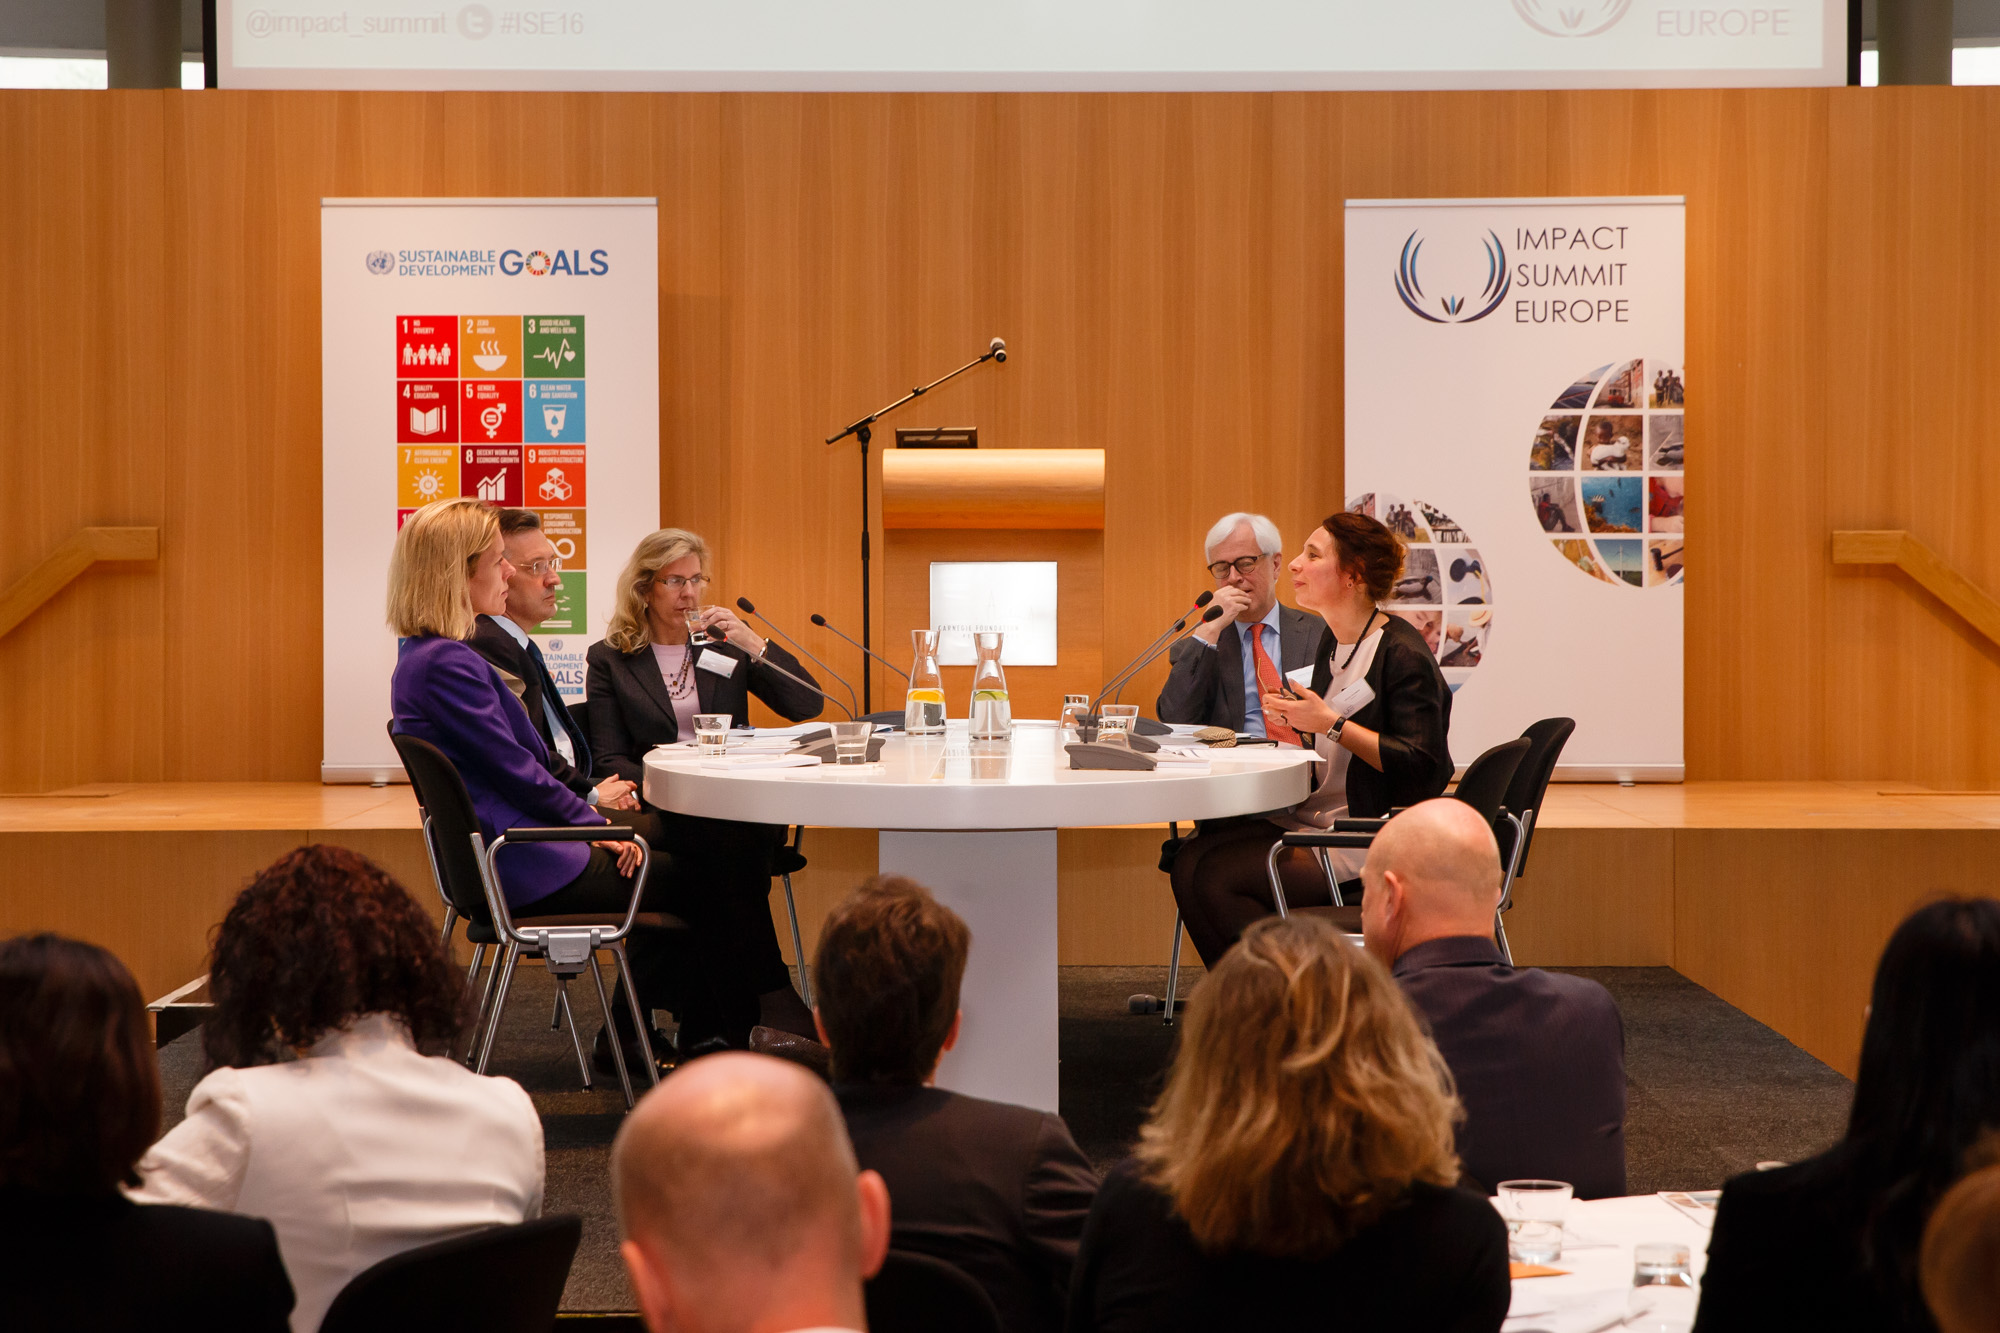 NEWS: Leading Dutch financial institutions embrace United Nations’ Sustainable Development Goals